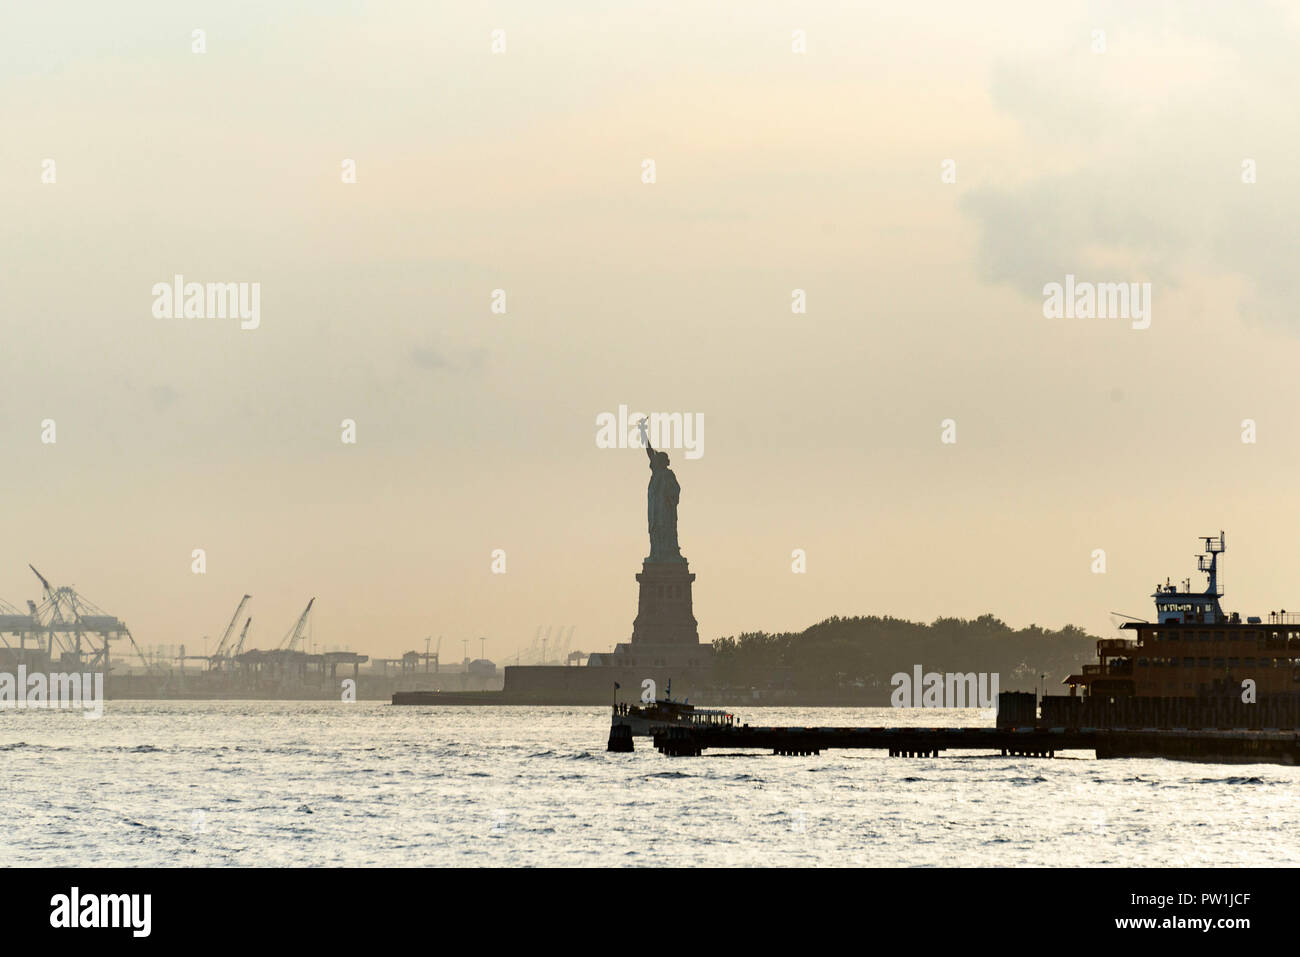 10-2018 Manhattan, New York. The Statue of Liberty at dusk, with the Staten Island ferry at right, and cranes and docks of New Jersey at left. Photo: Stock Photo